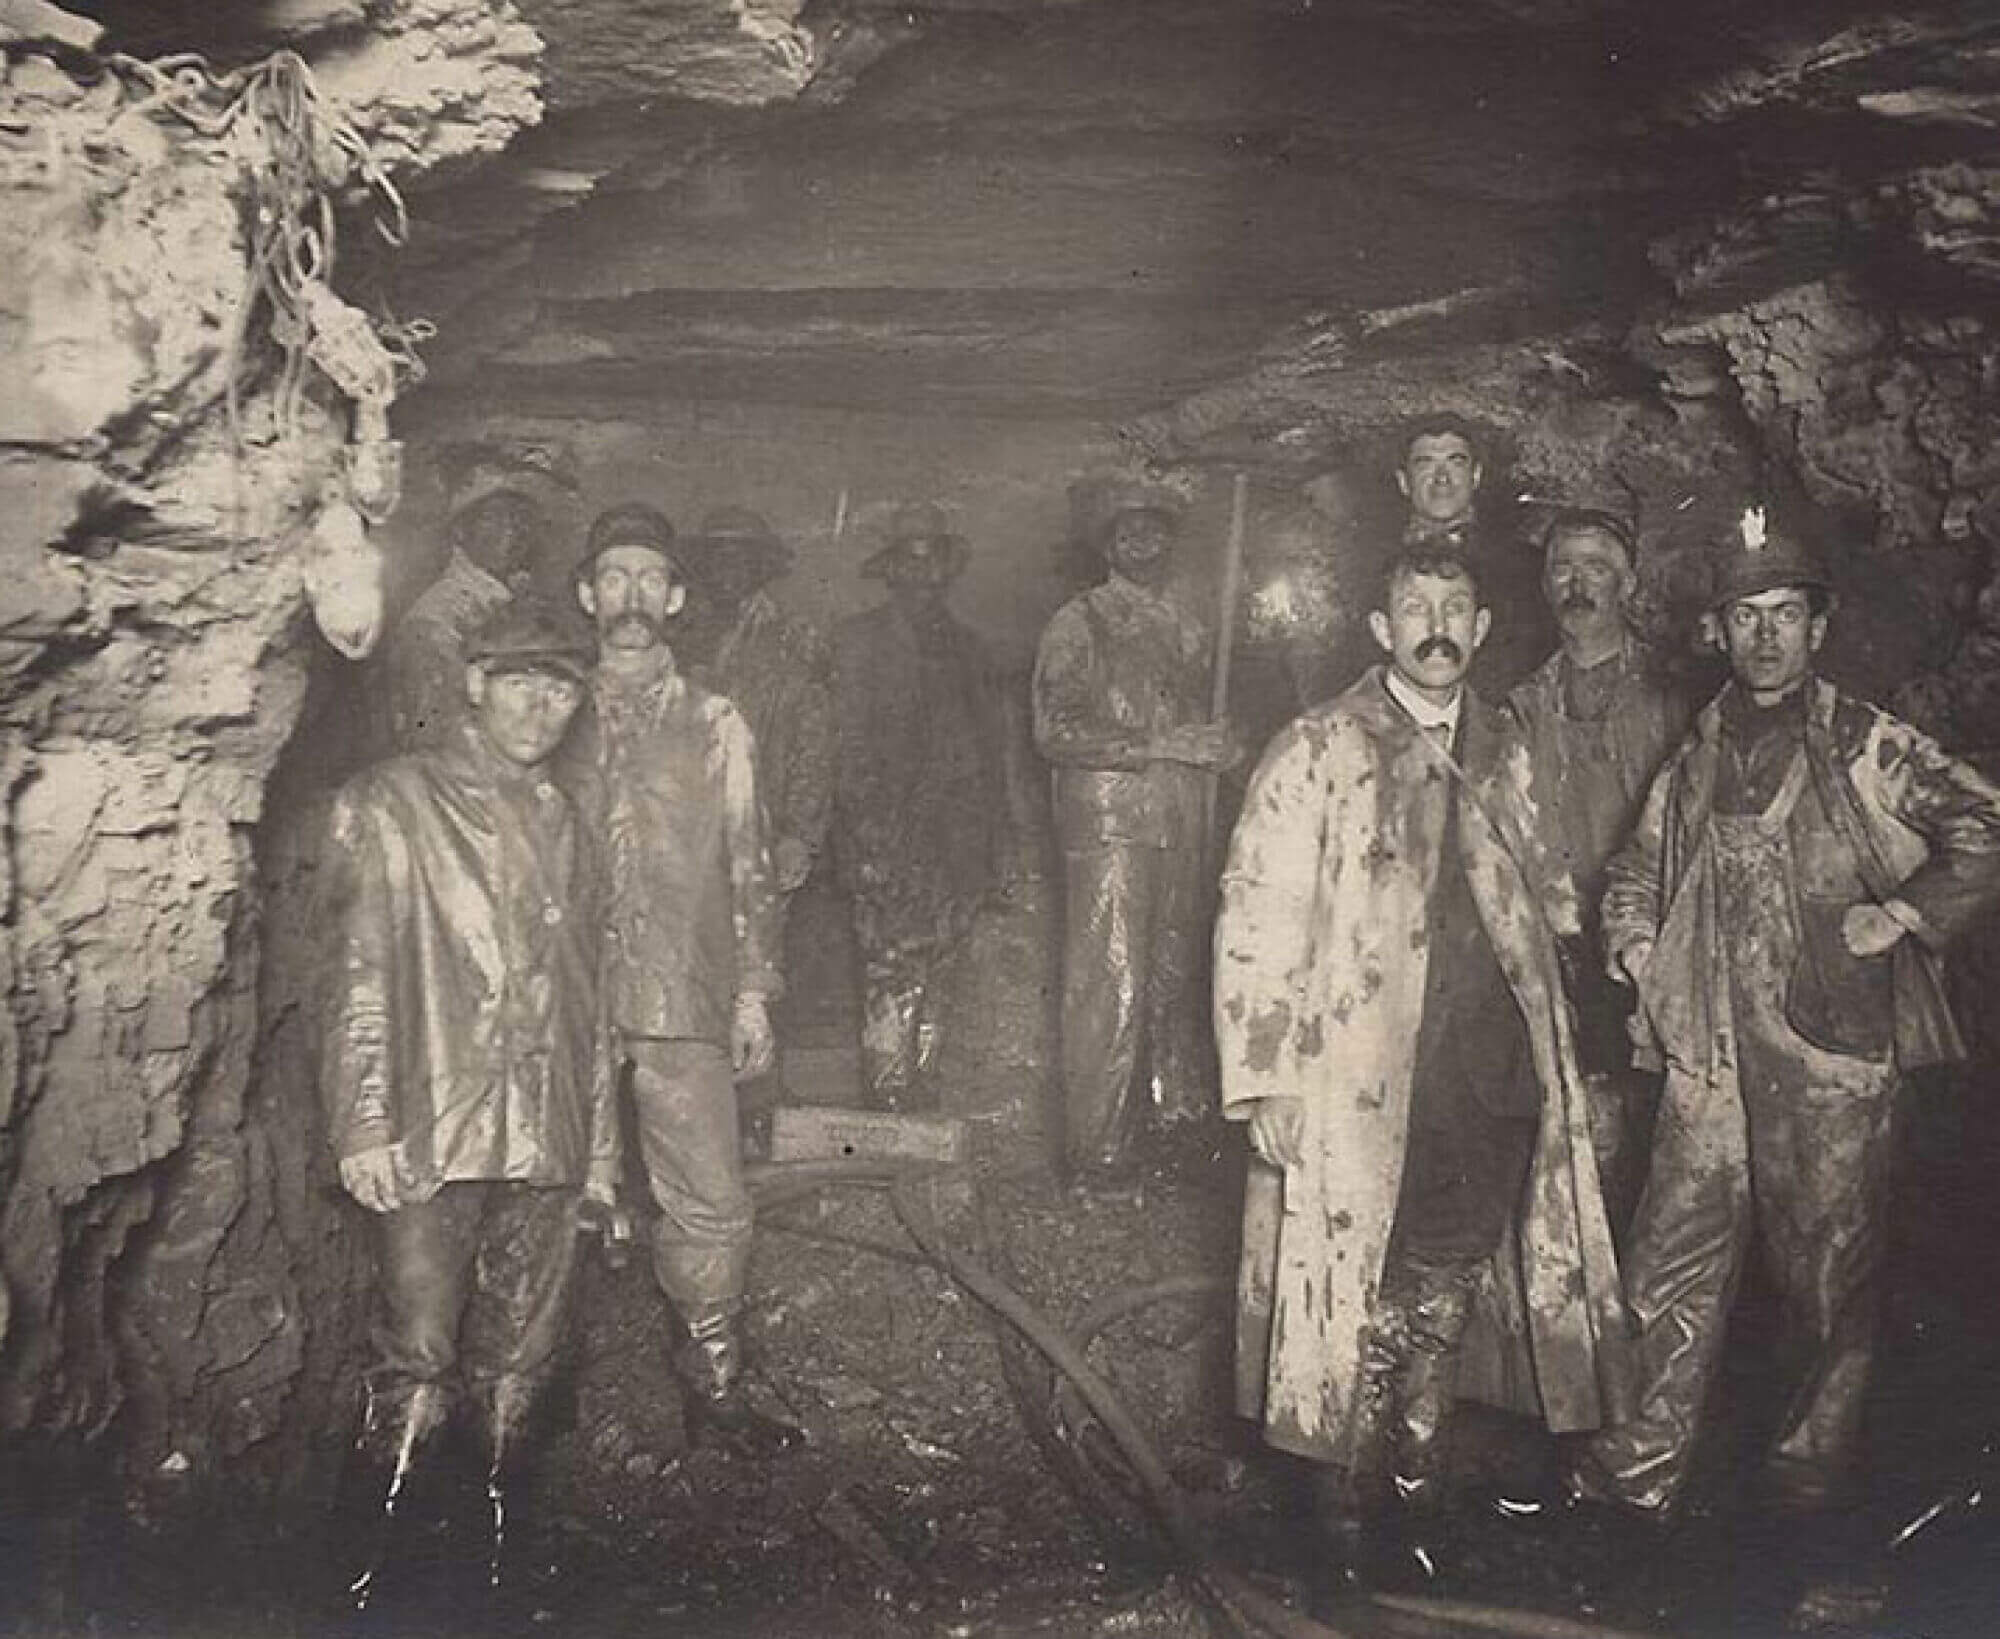 A black and white photograph of a group of men working in an underground tunnel. Their clothes are filled with mud and dirt.